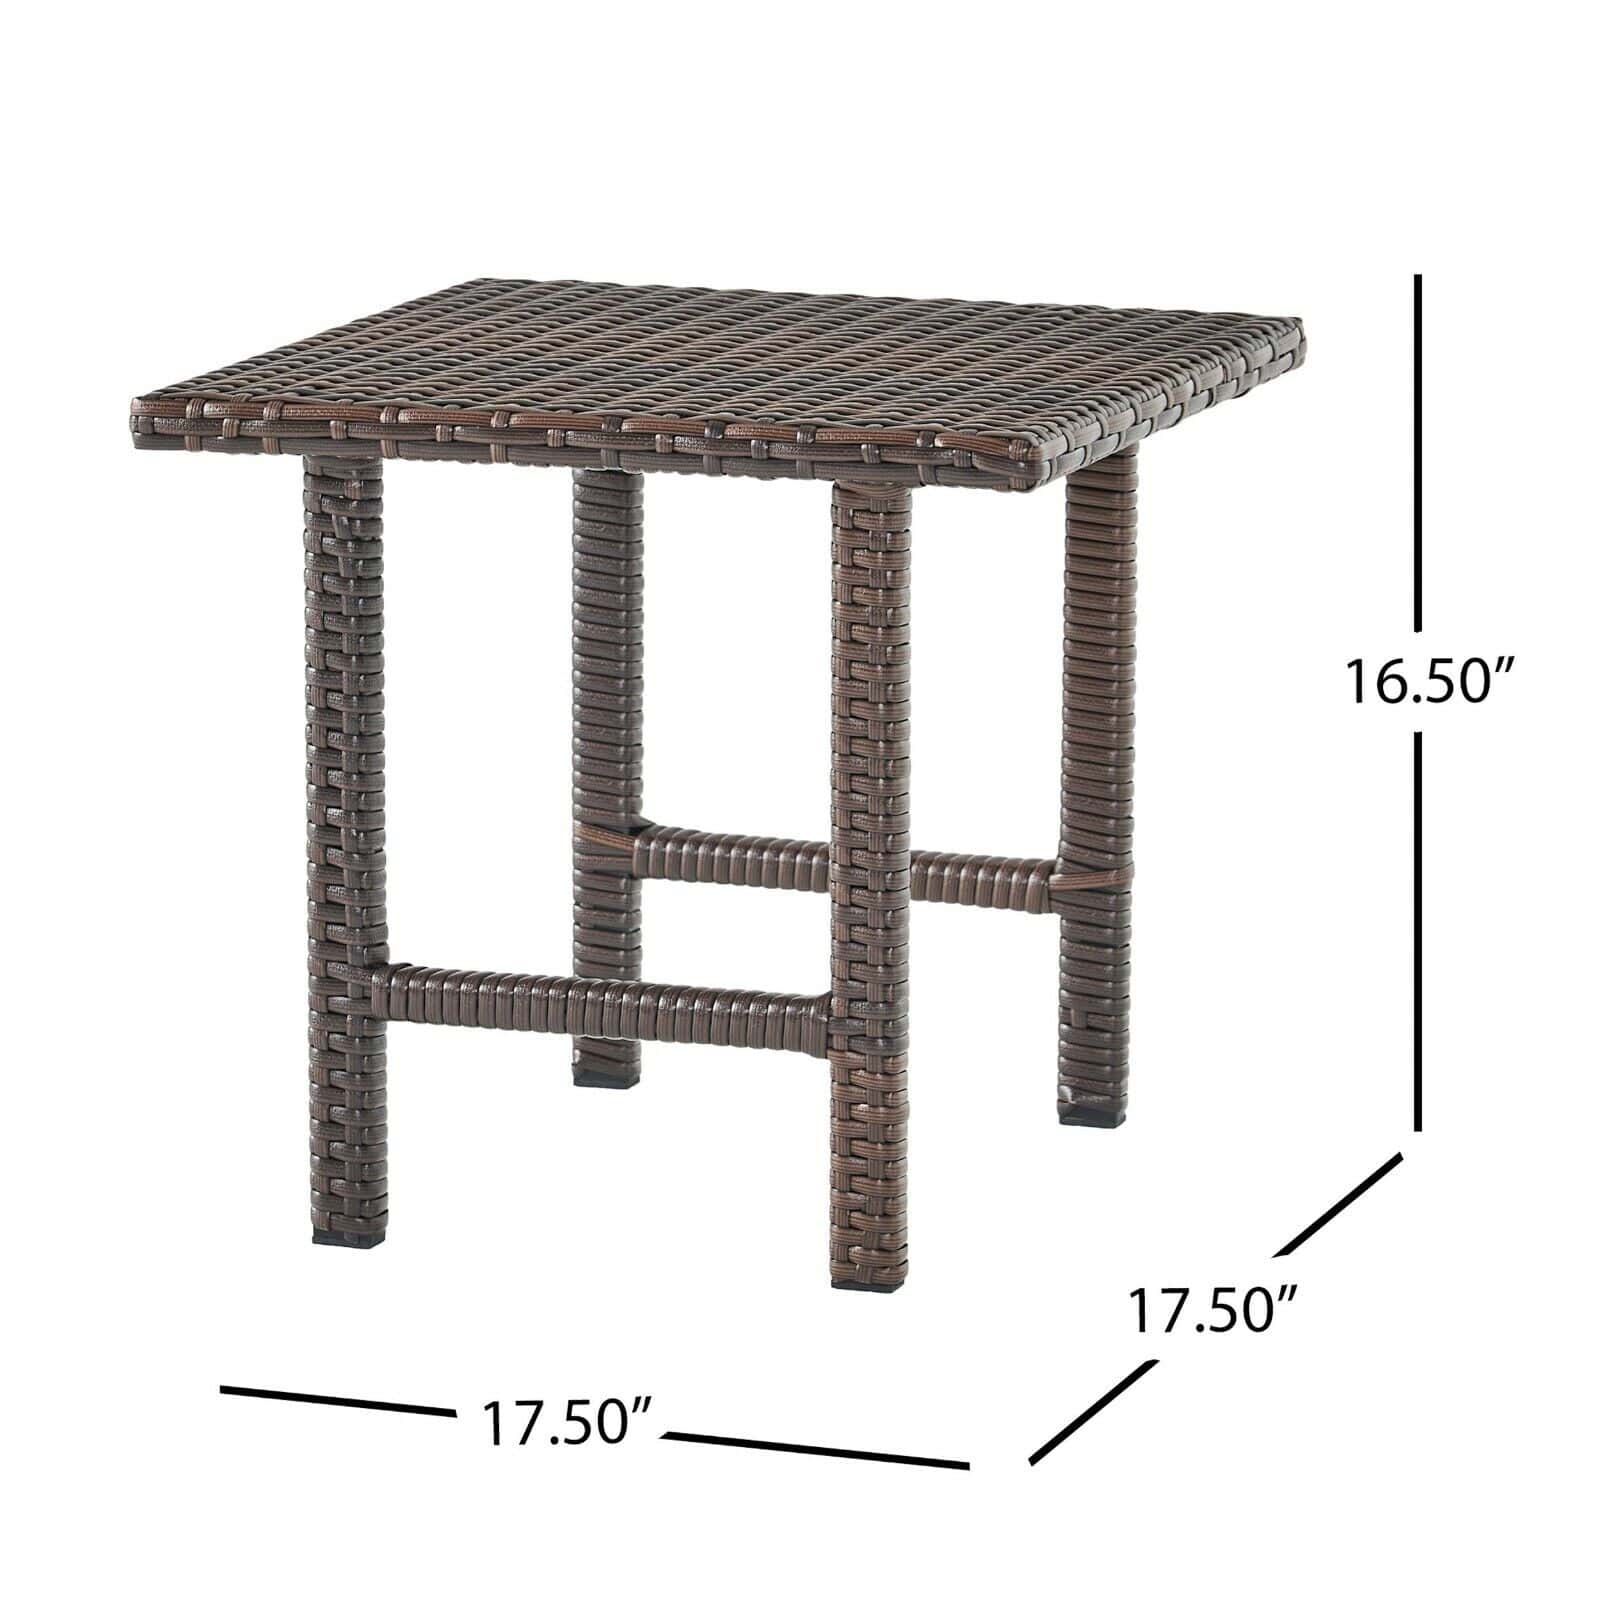 The measurements of an outdoor wicker side table.